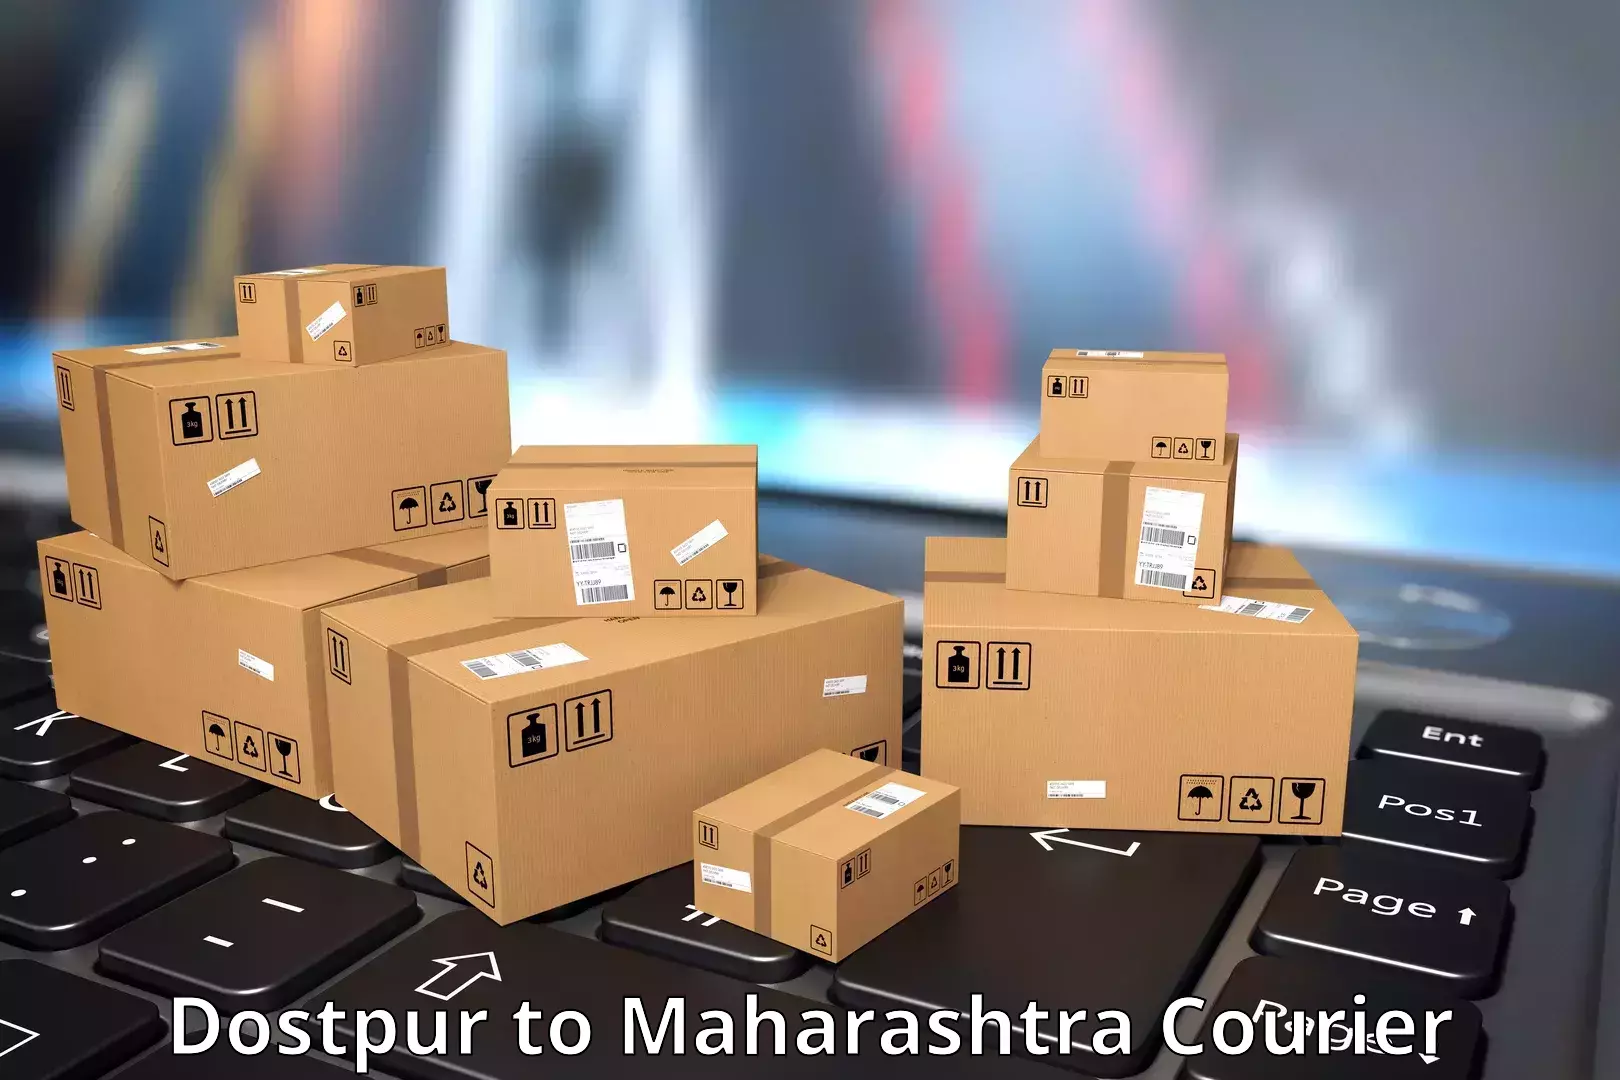 Reliable courier service Dostpur to Kaij